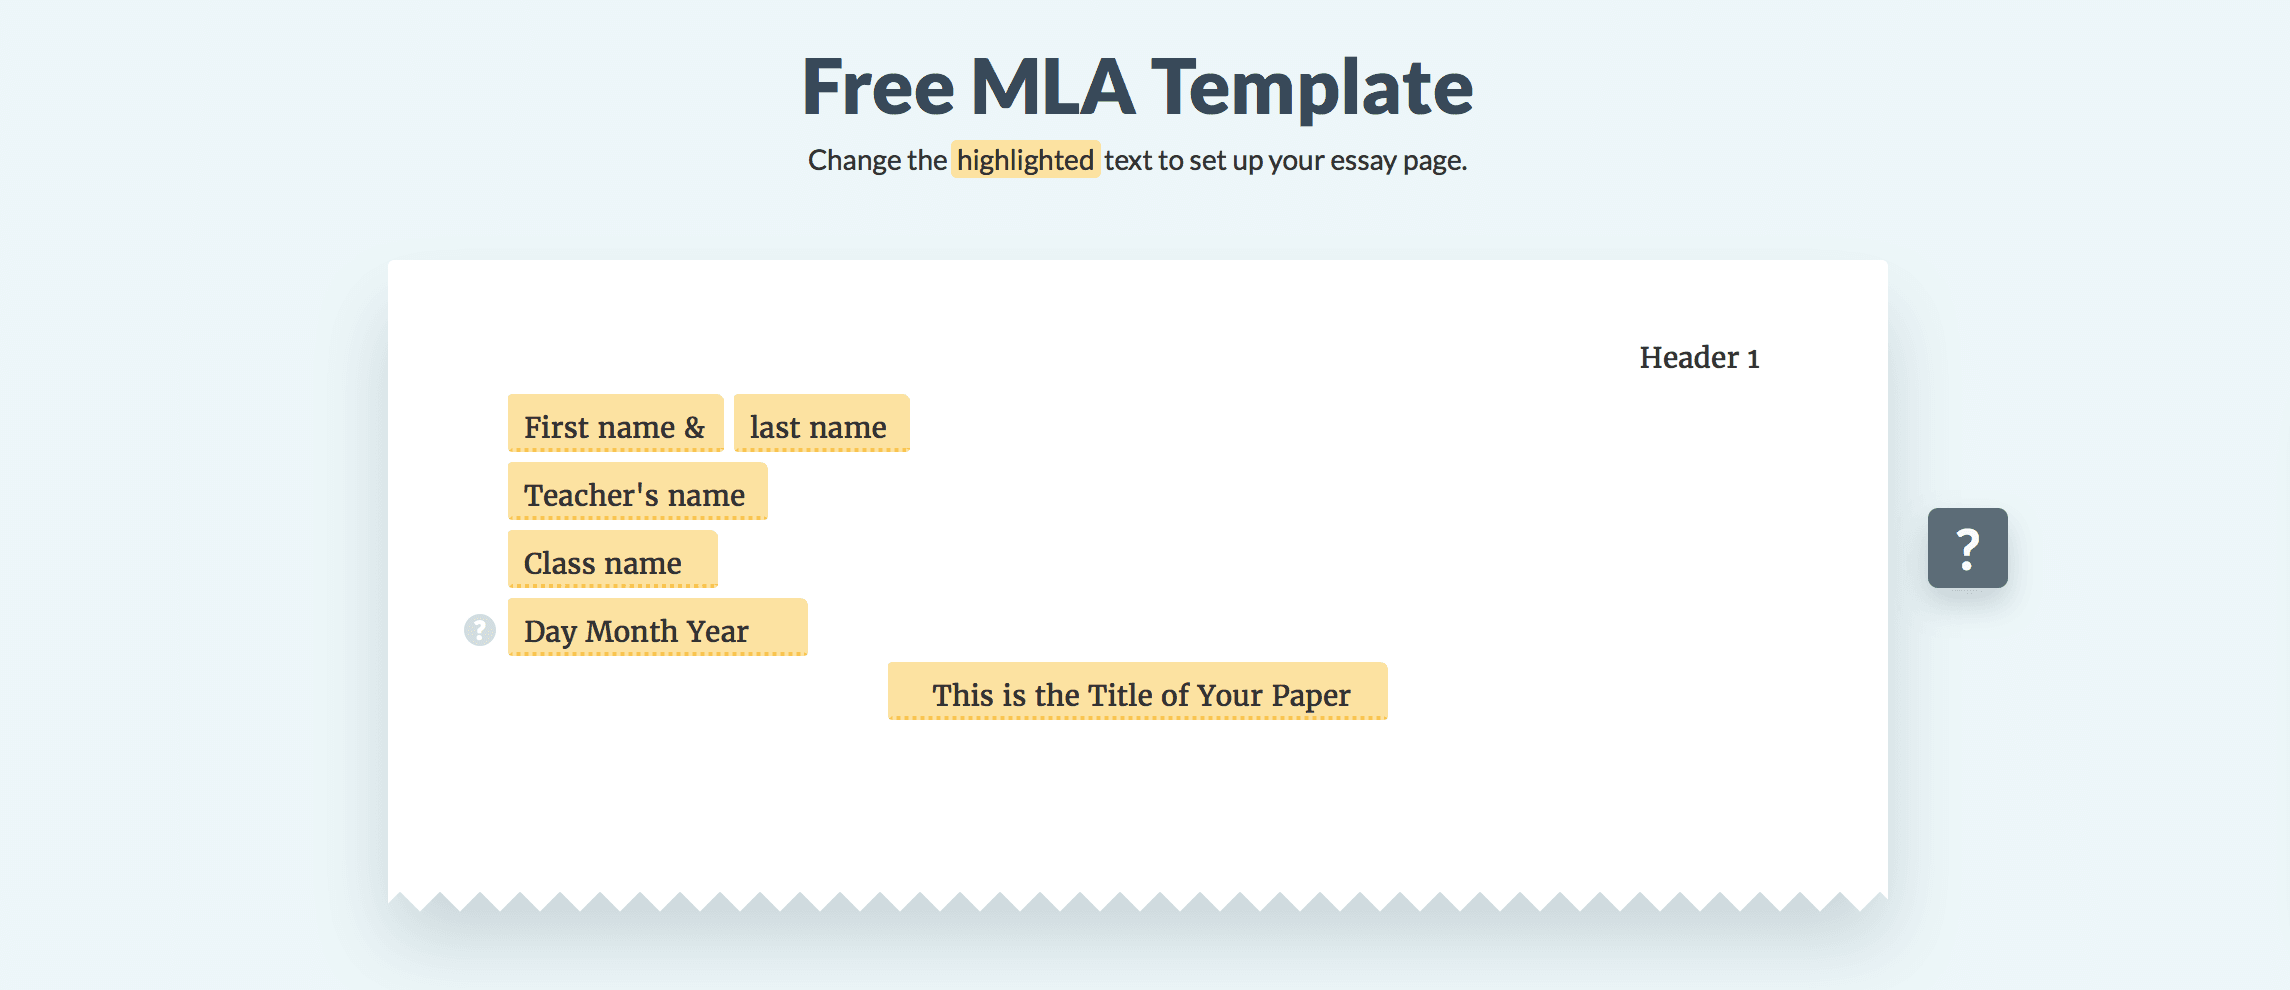 Formatically's MLA Template is easy to use. All you need to do is change the text with a bold yellow highlight